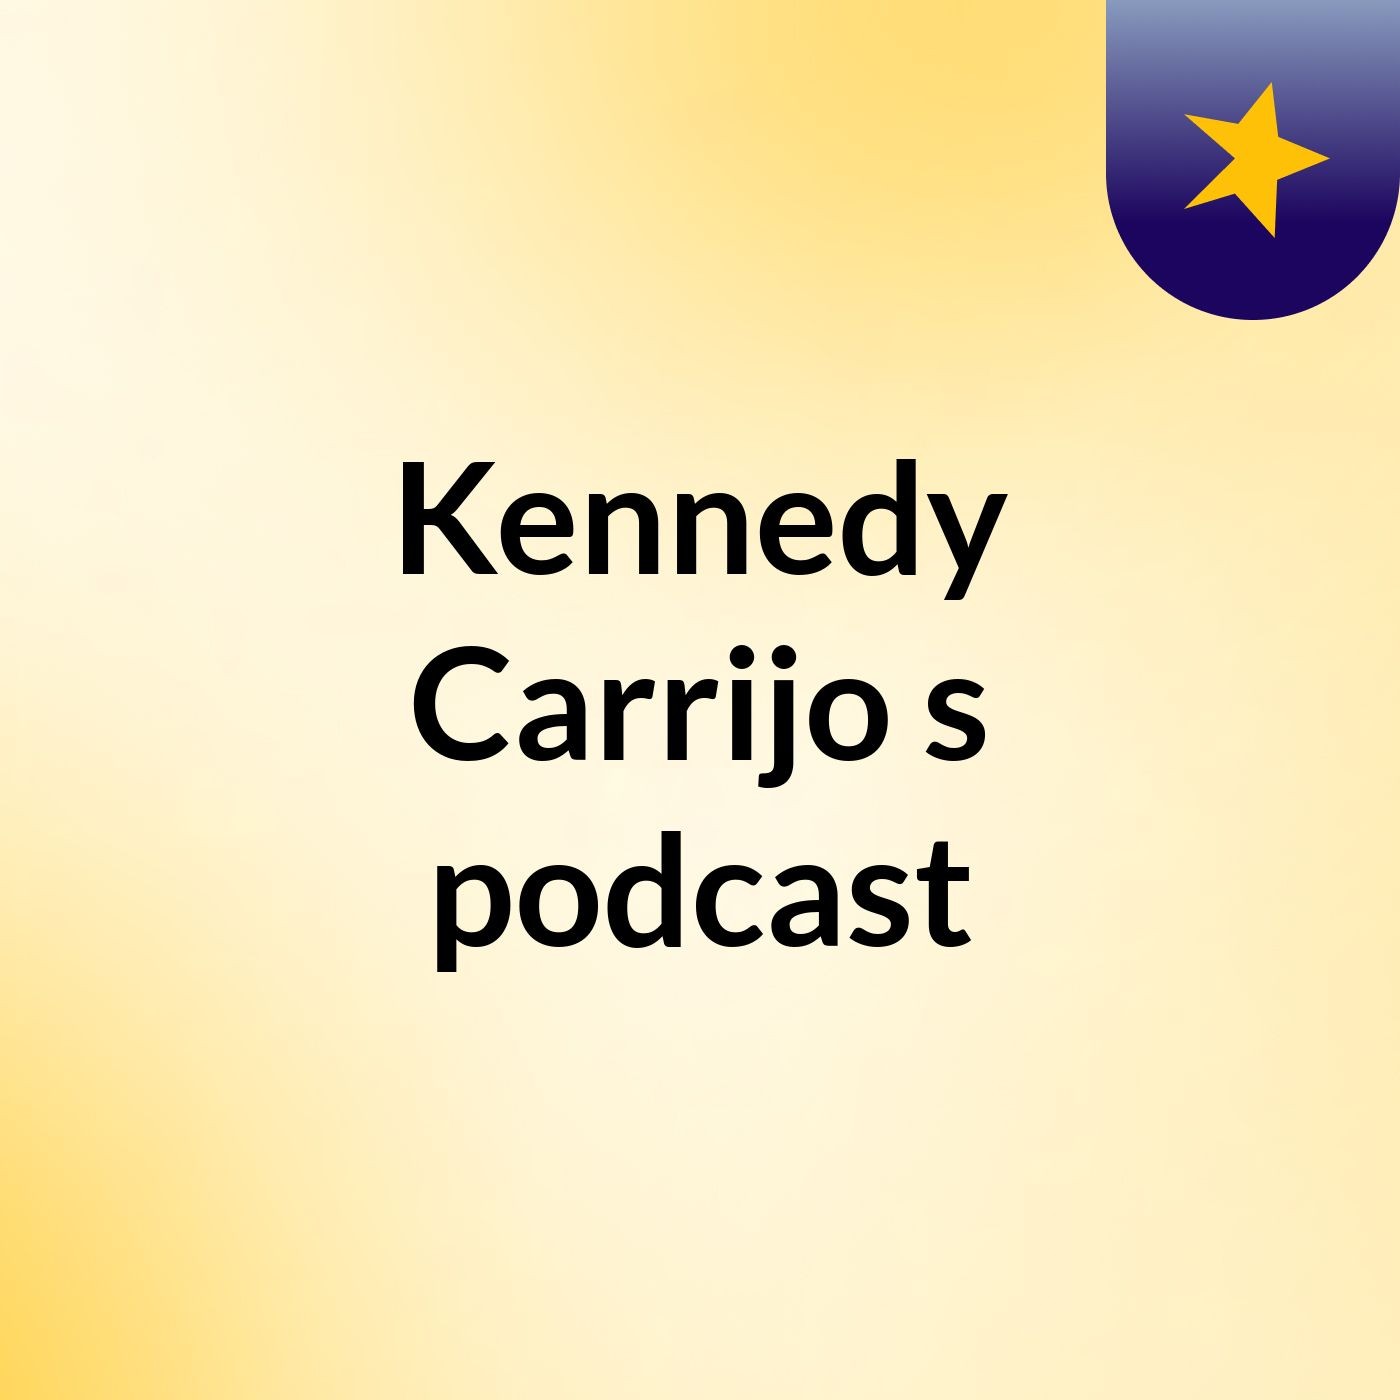 Kennedy Carrijo's podcast